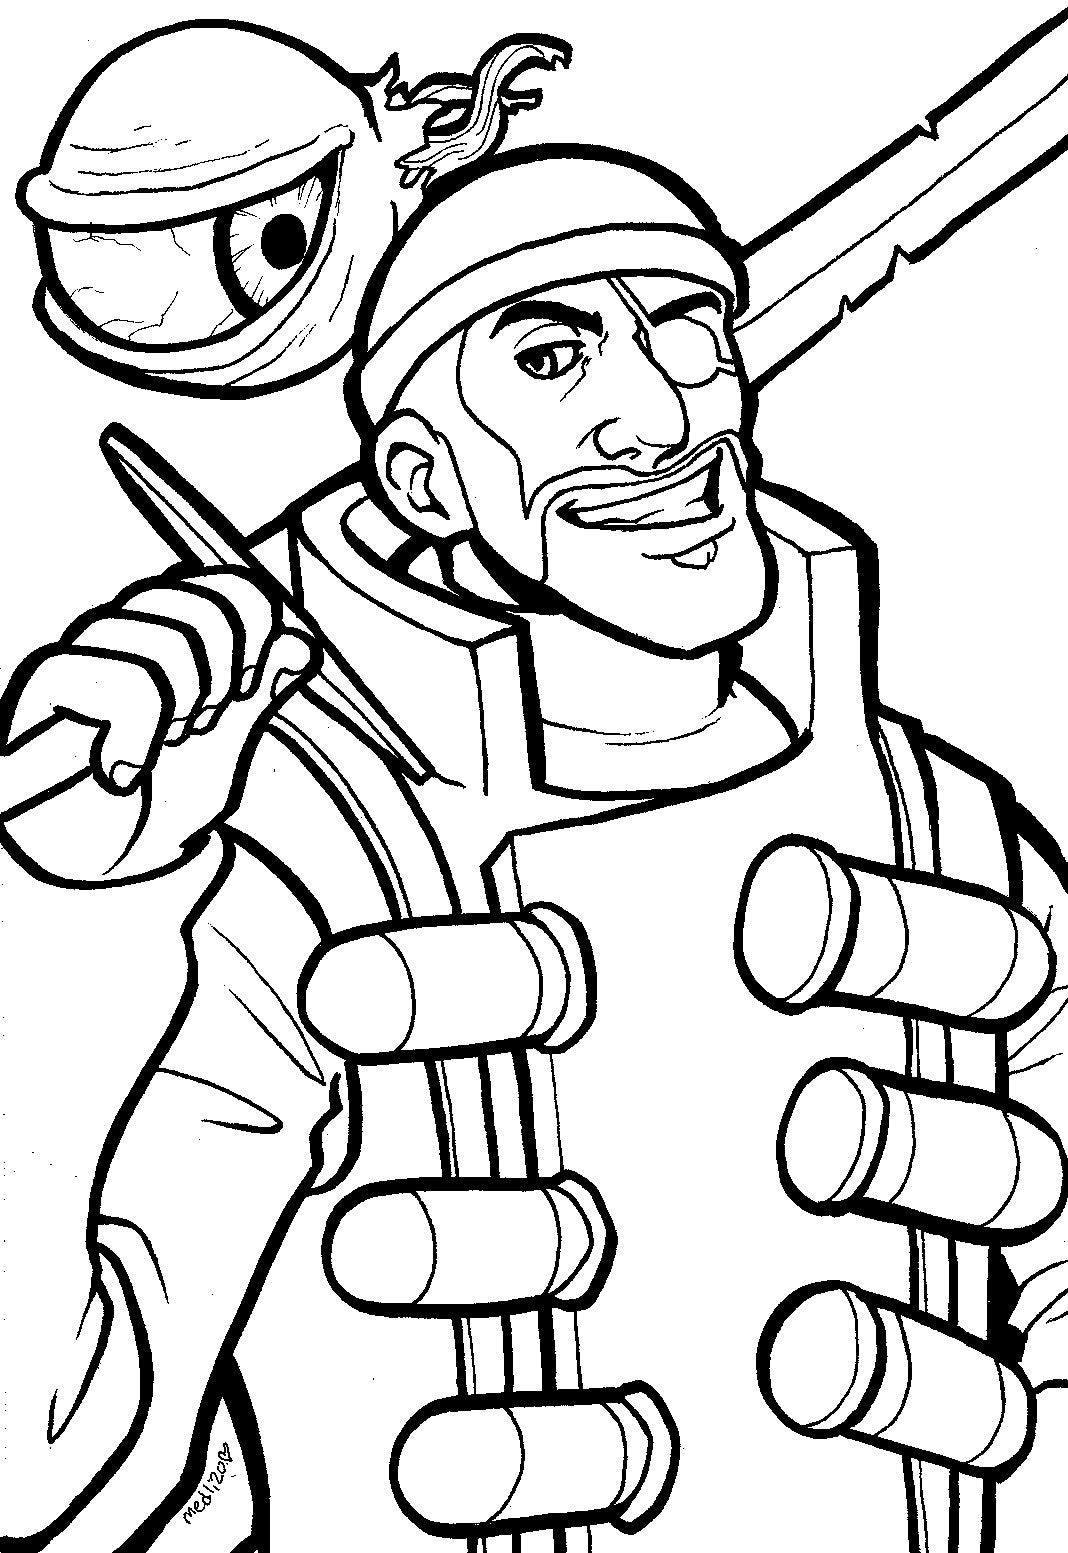 A while back, I said I'd make you guys some TF2-related coloring ...